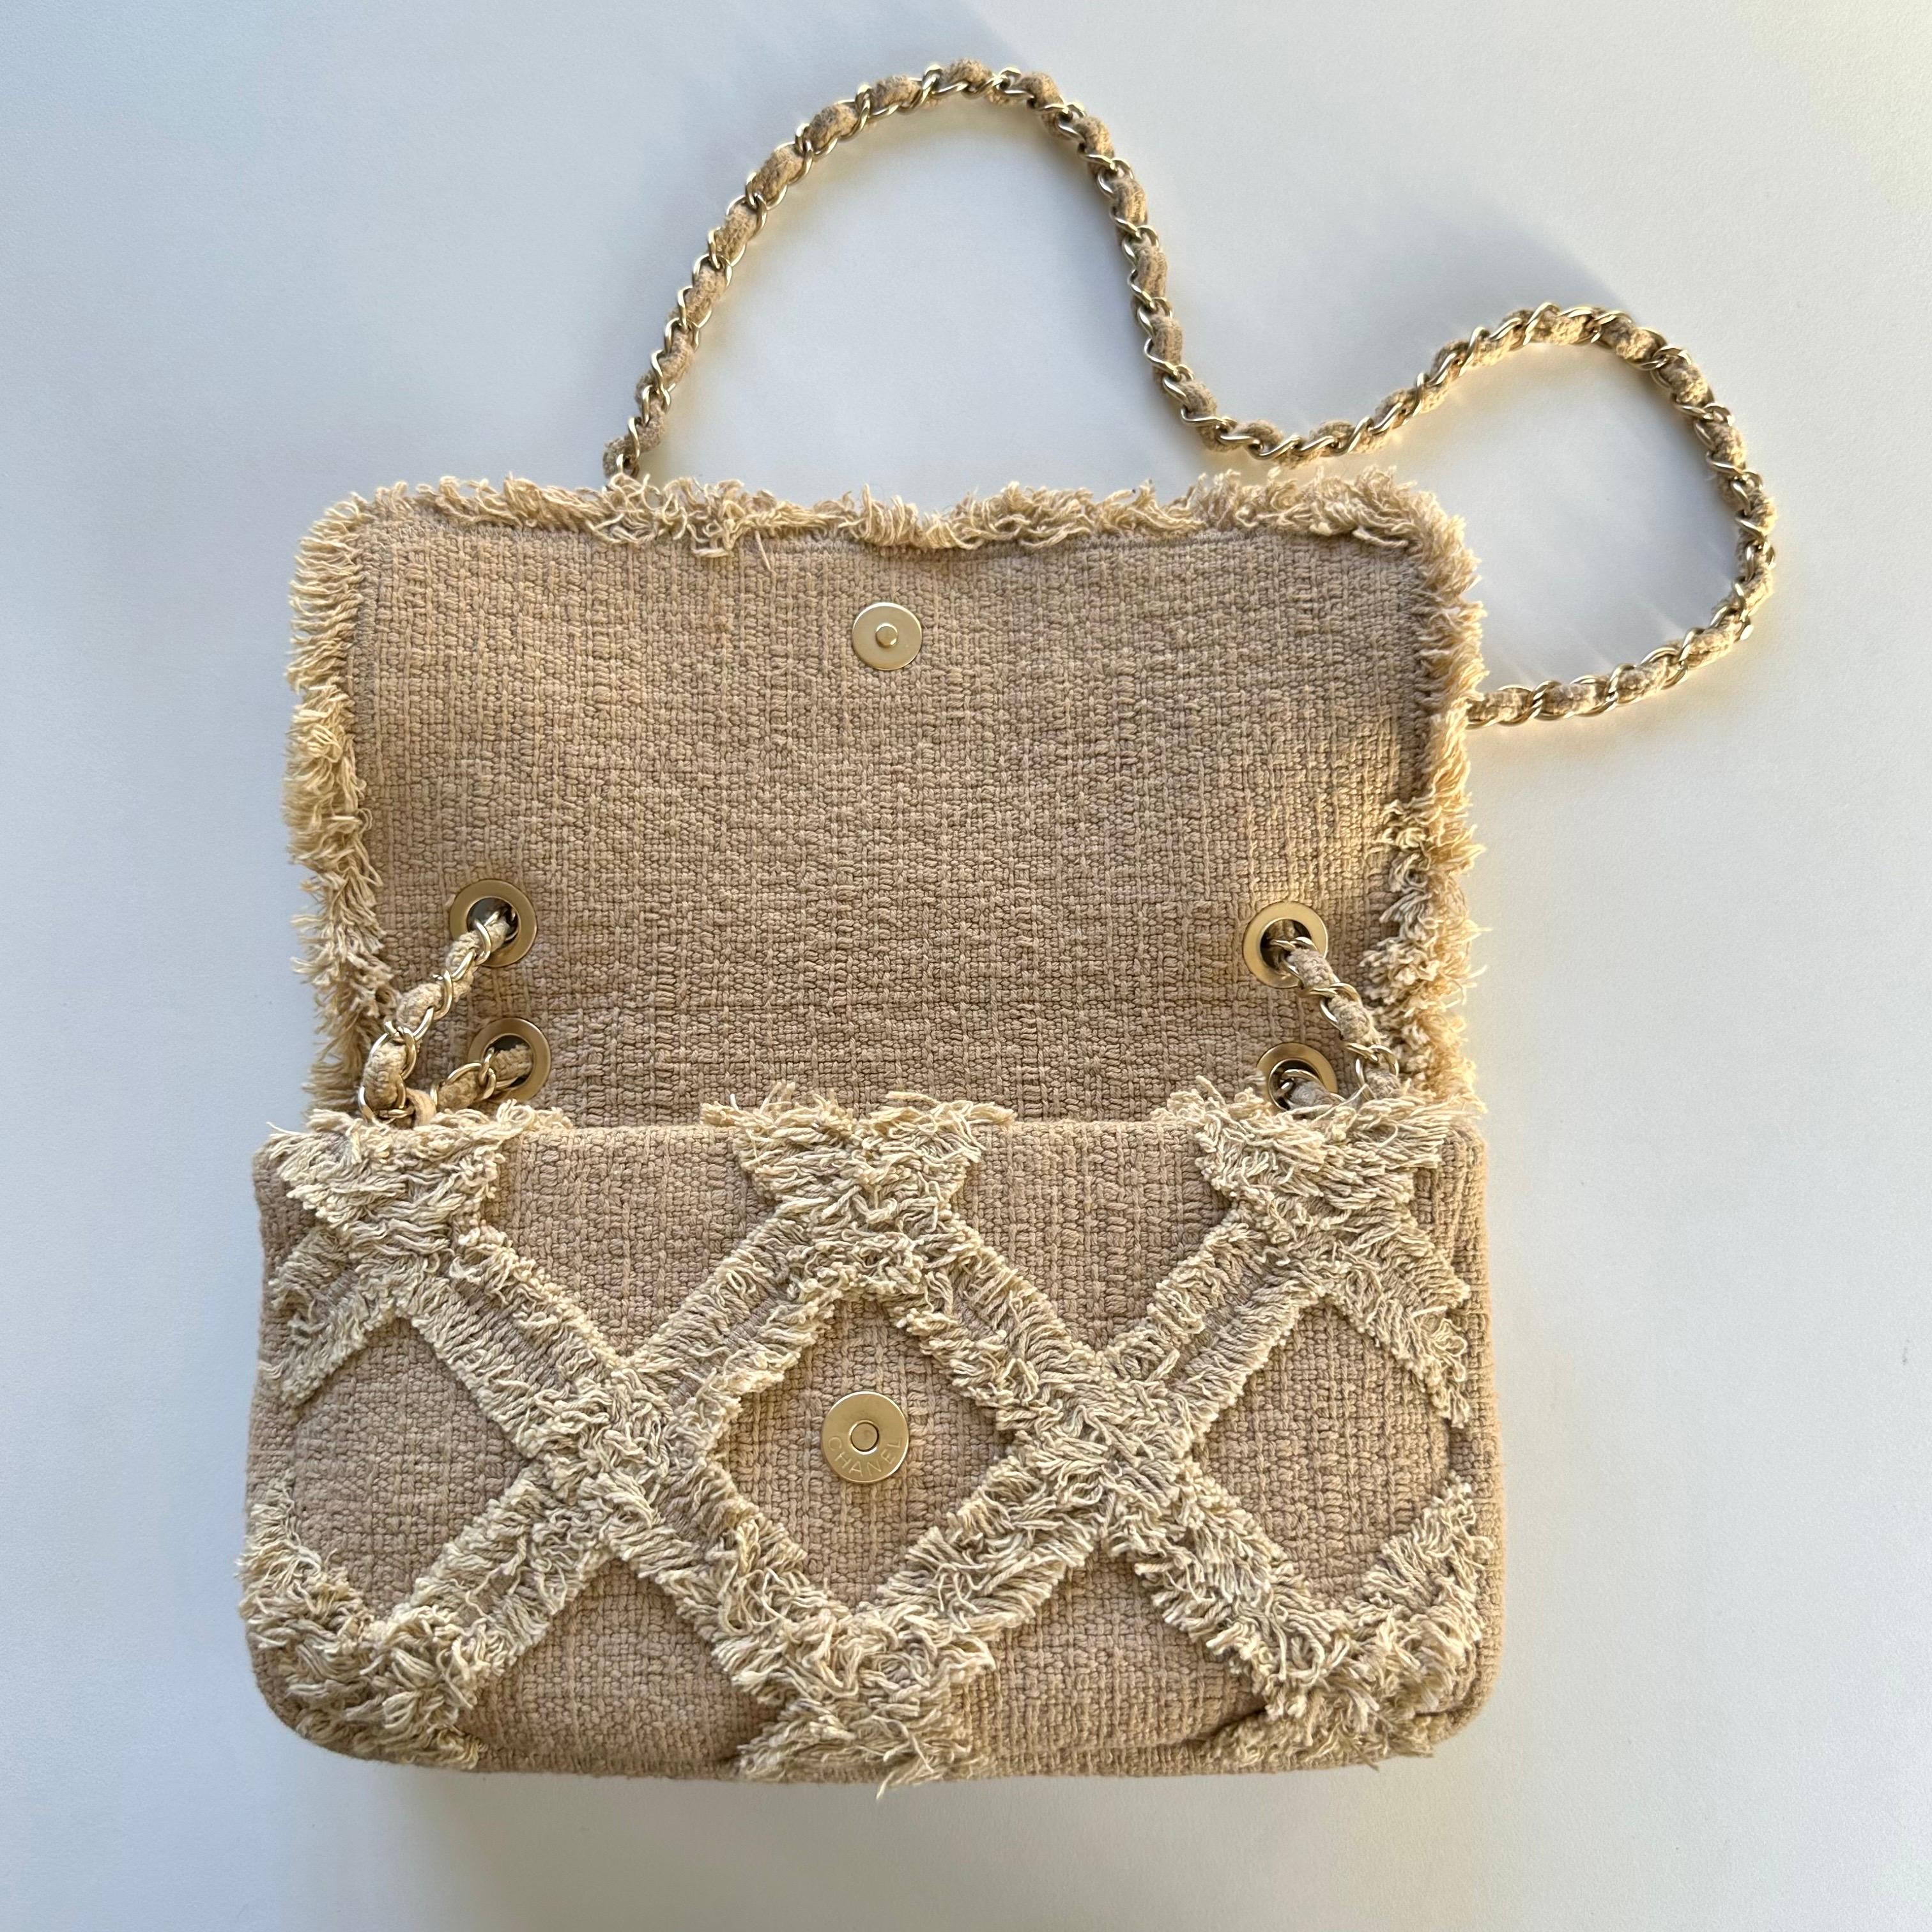 Chanel 2009 Small Sized Beige Tweed Fringe Organic Crochet Nature Flap Bag For Sale 5